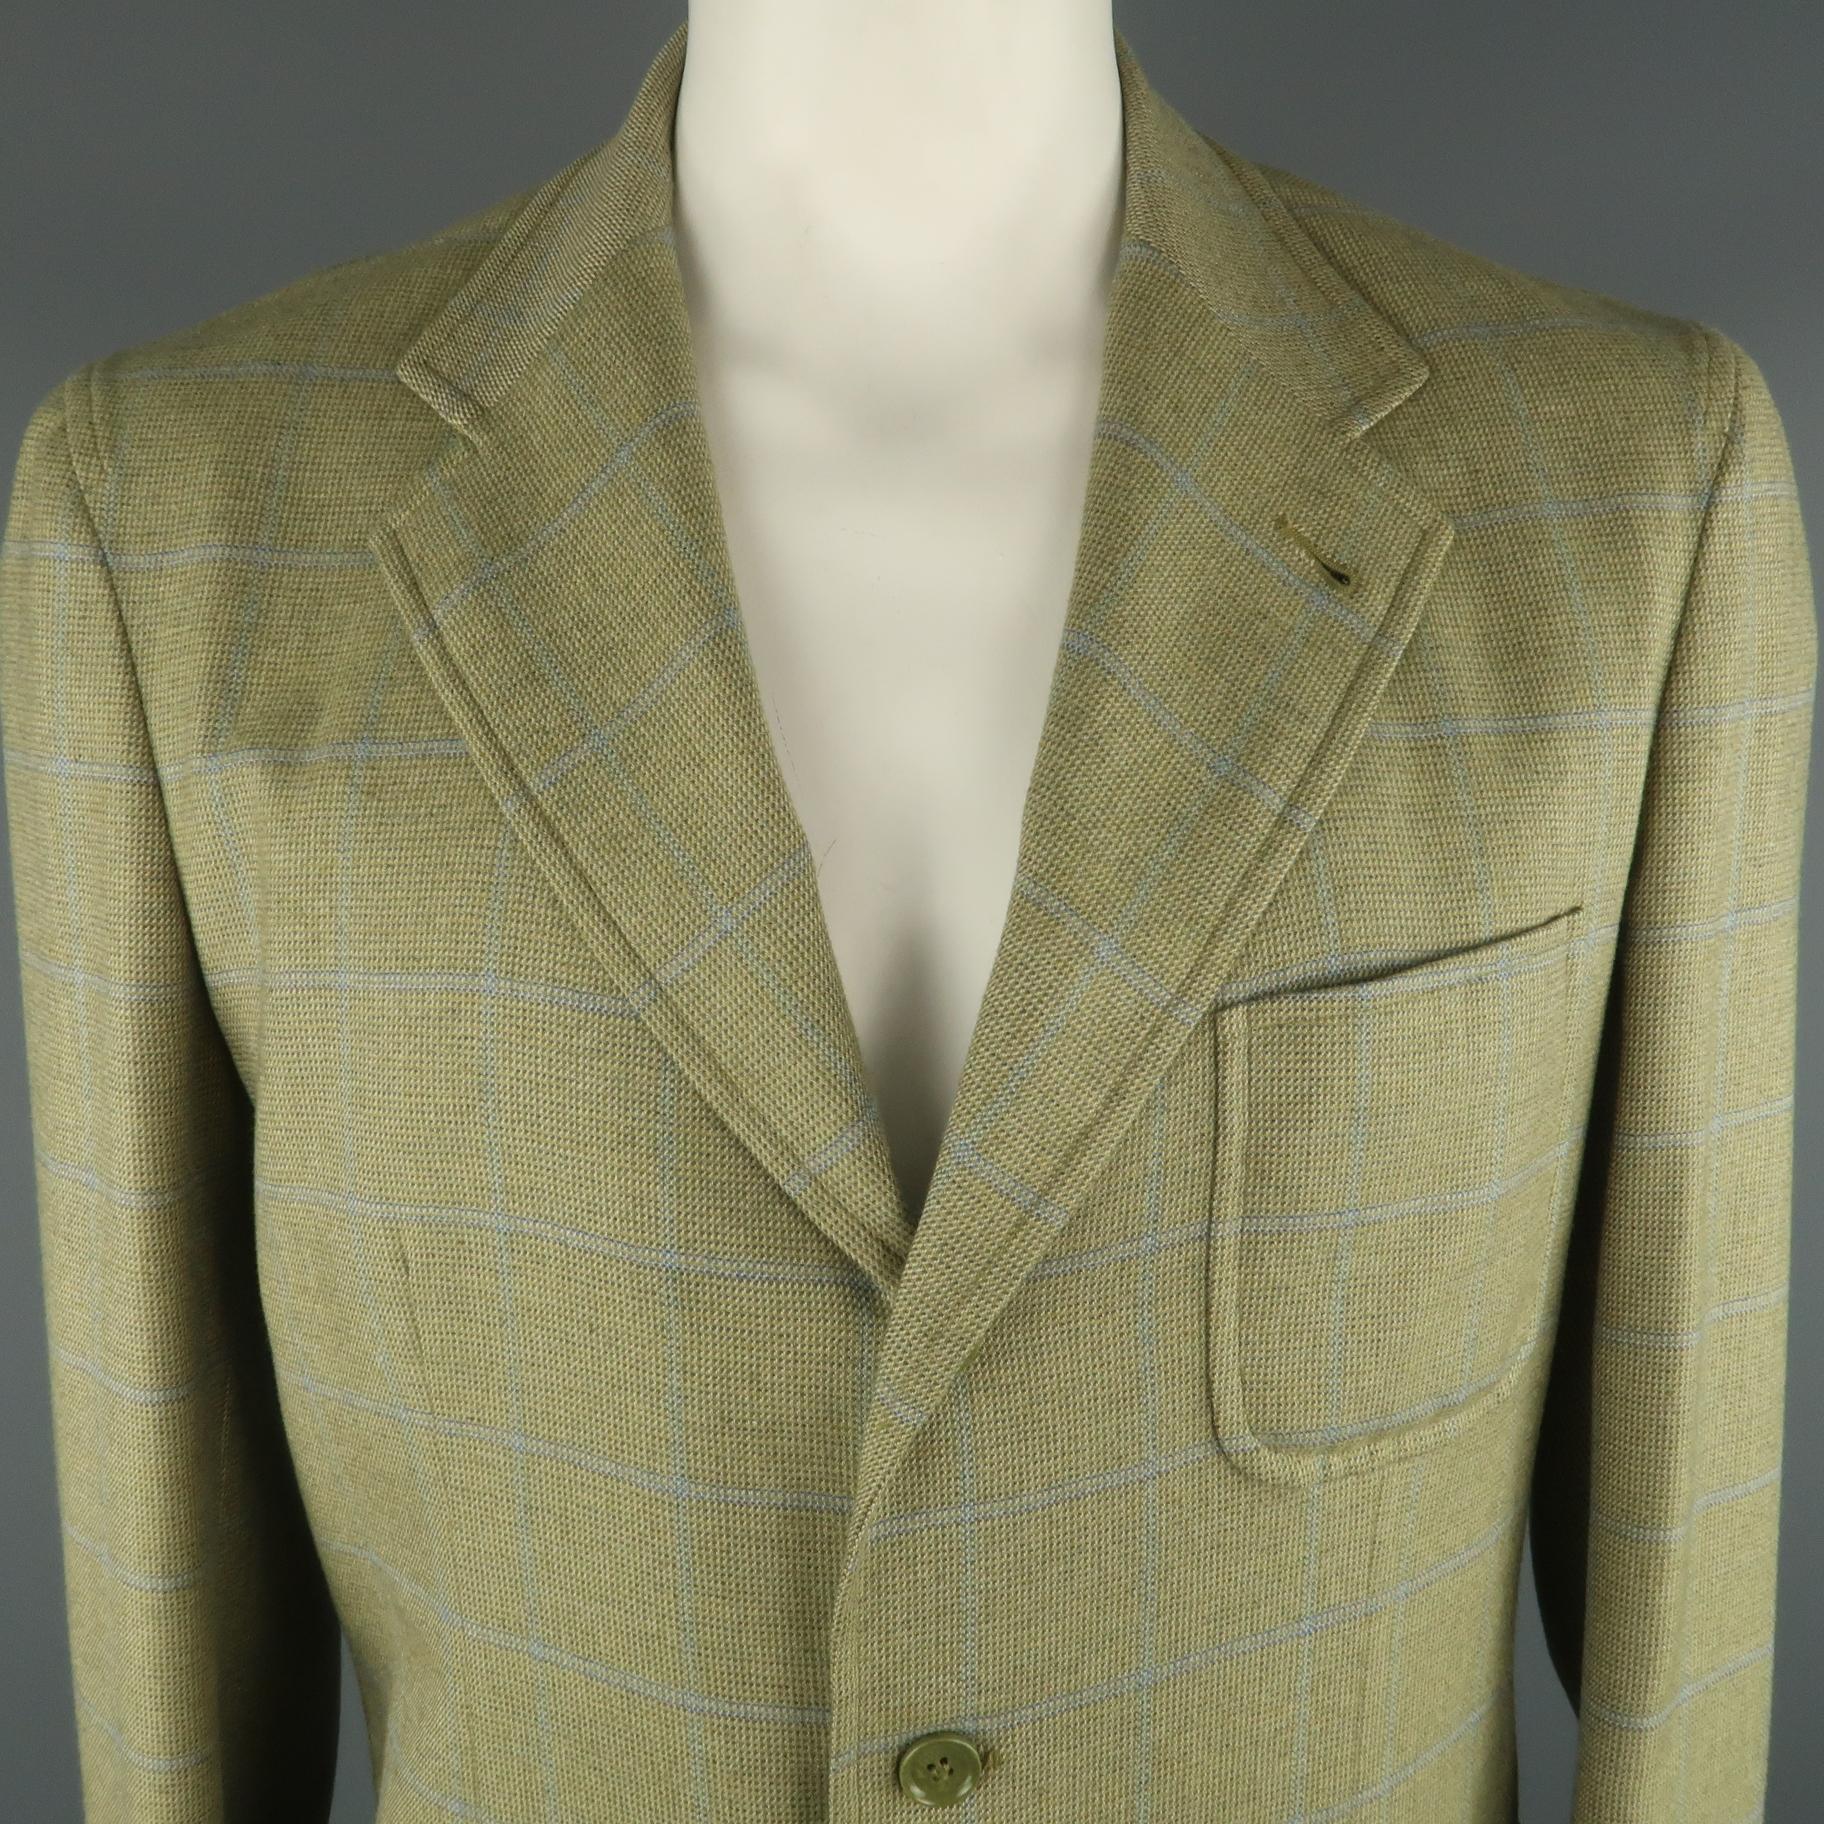 LORO PIANA Sport Coat comes in green and blue tones in a plaid cashmere material, with a notch lapel, patch pockets, 3 buttons at closure, single breasted, double vent at back, unlined. Made in Italy.
 
Excellent  Pre-Owned Condition.
Marked: IT